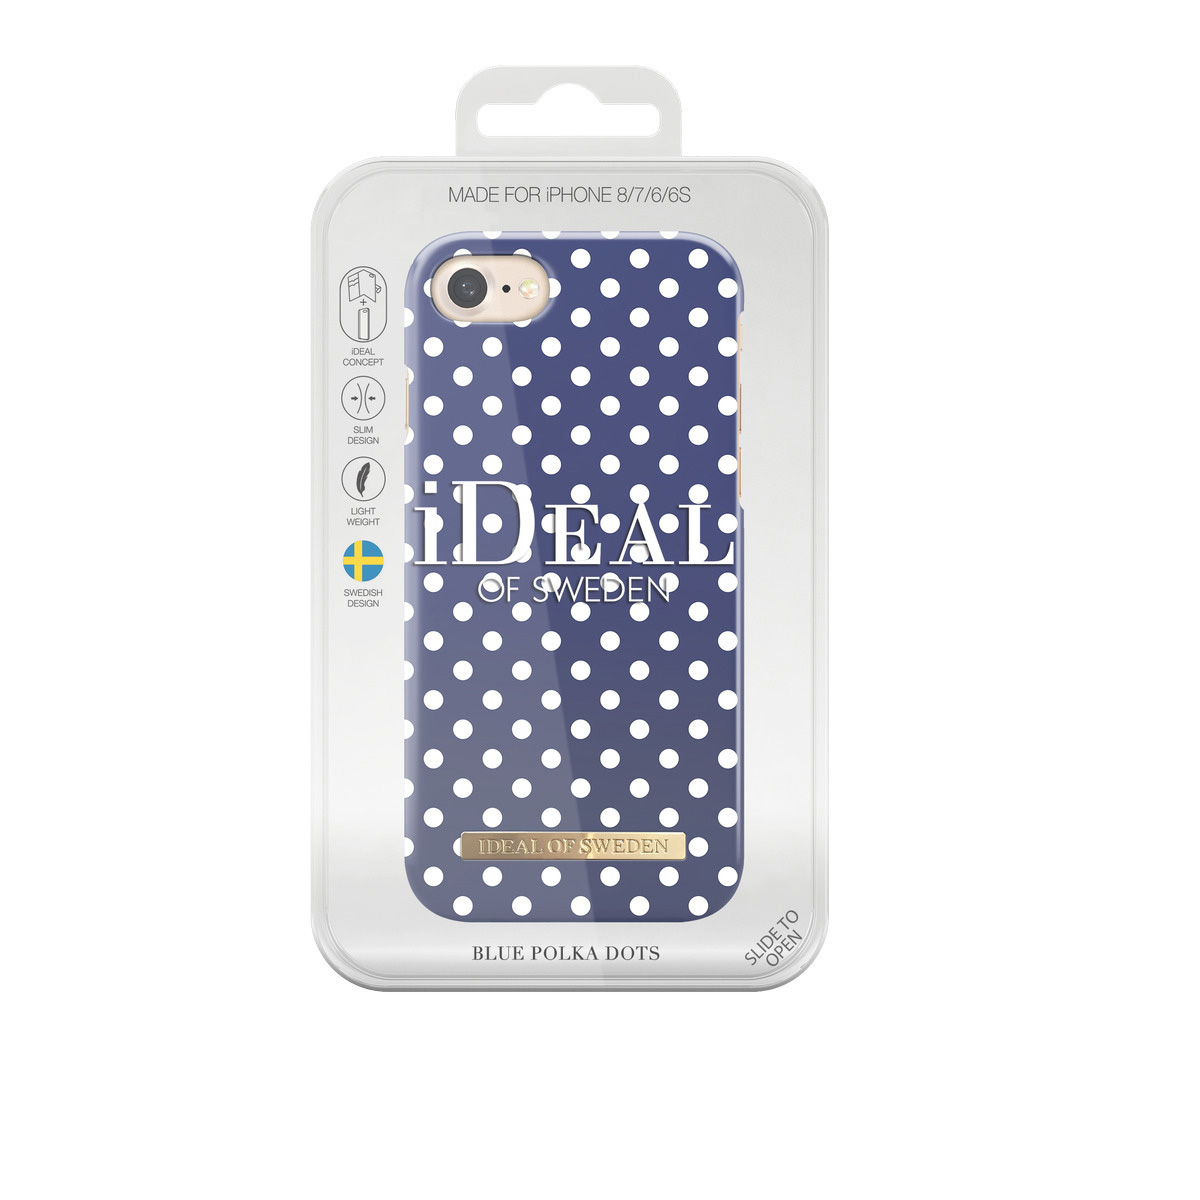 Polka 6, 7, OF IDEAL iPhone iPhone Apple, 8, Backcover, iPhone SWEDEN Dots Fashion,